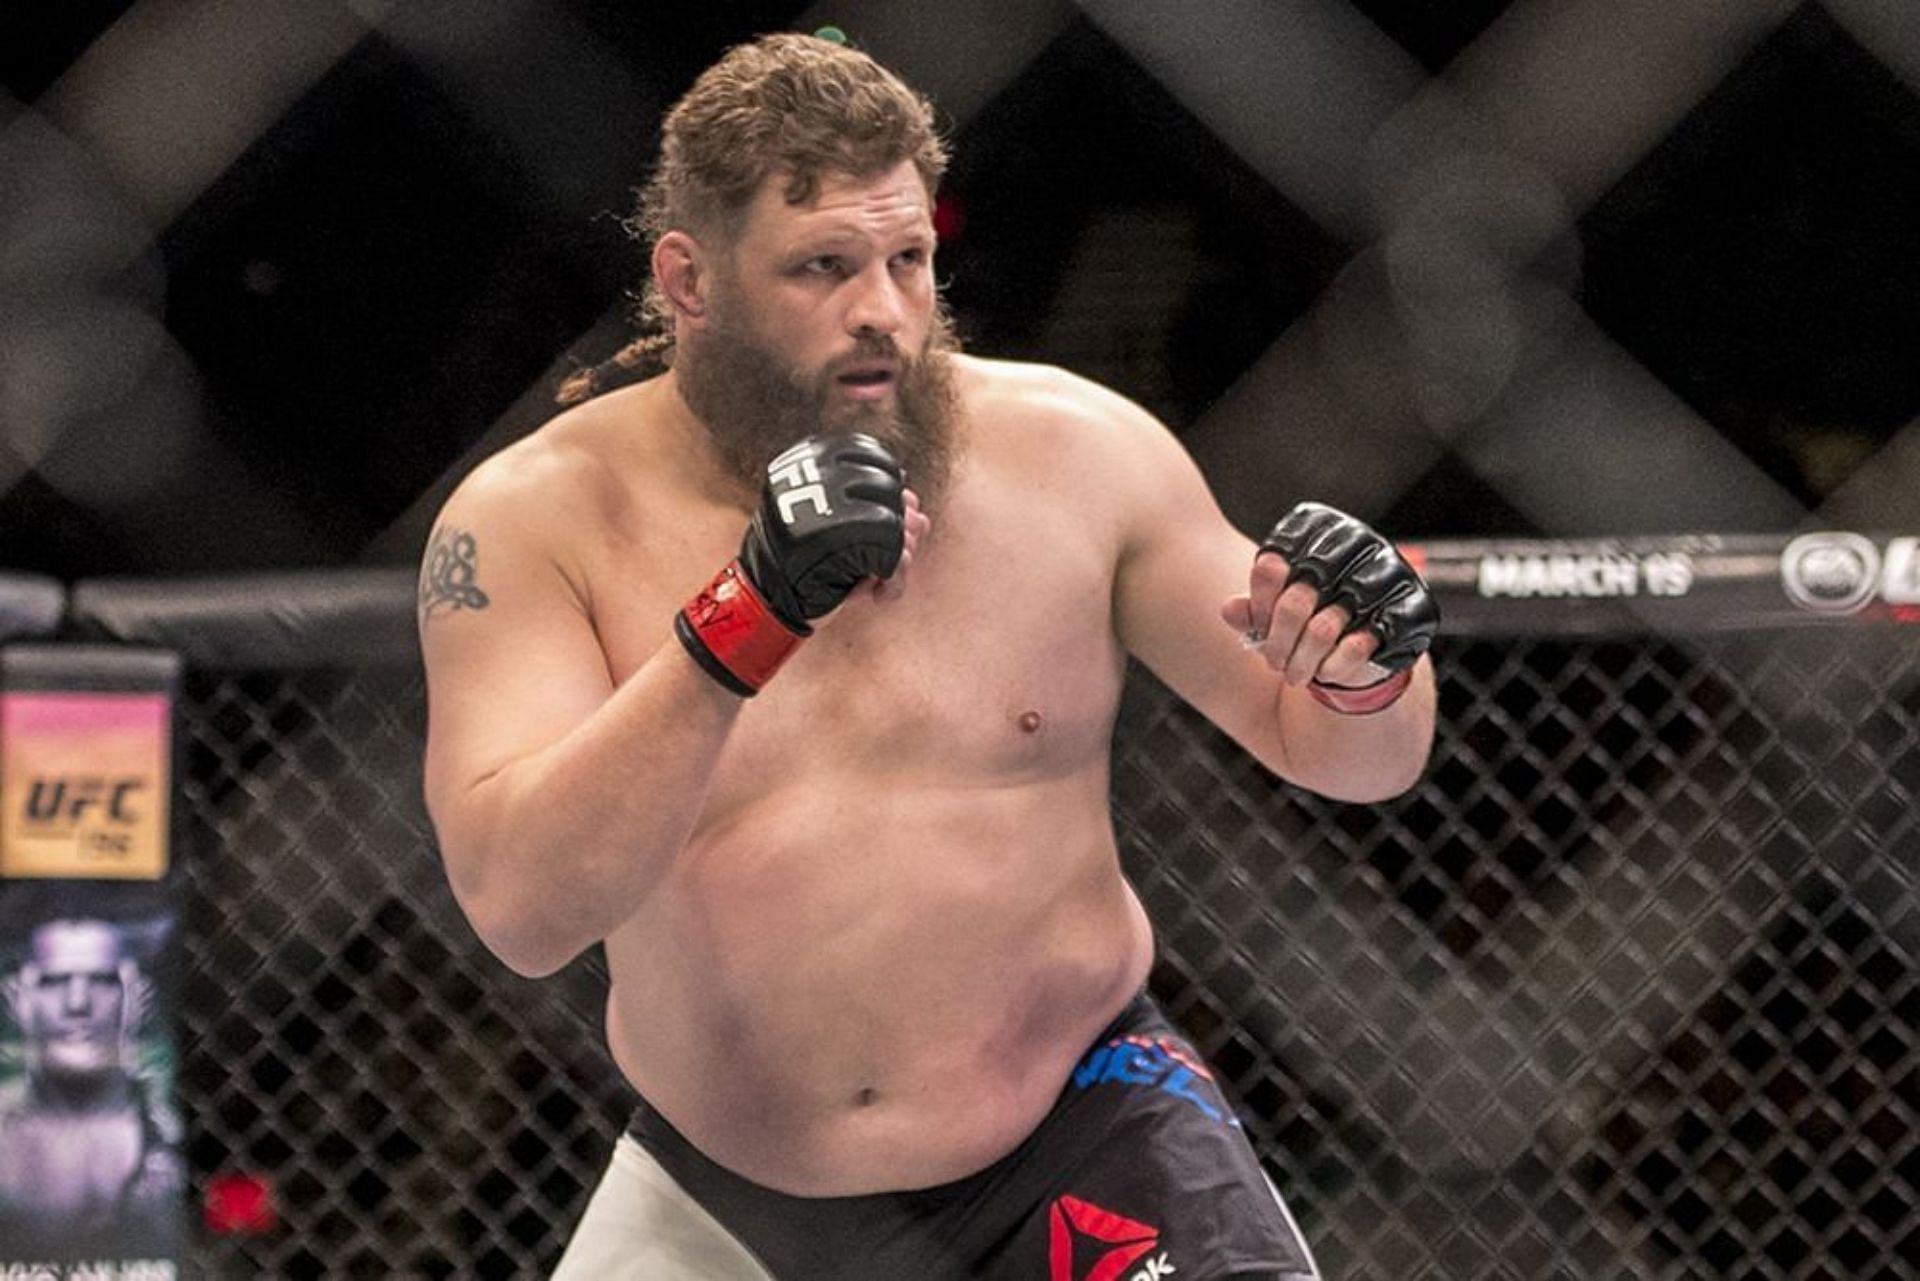 Roy Nelson was often criticised for his physique, but rarely struggled inside the octagon due to it